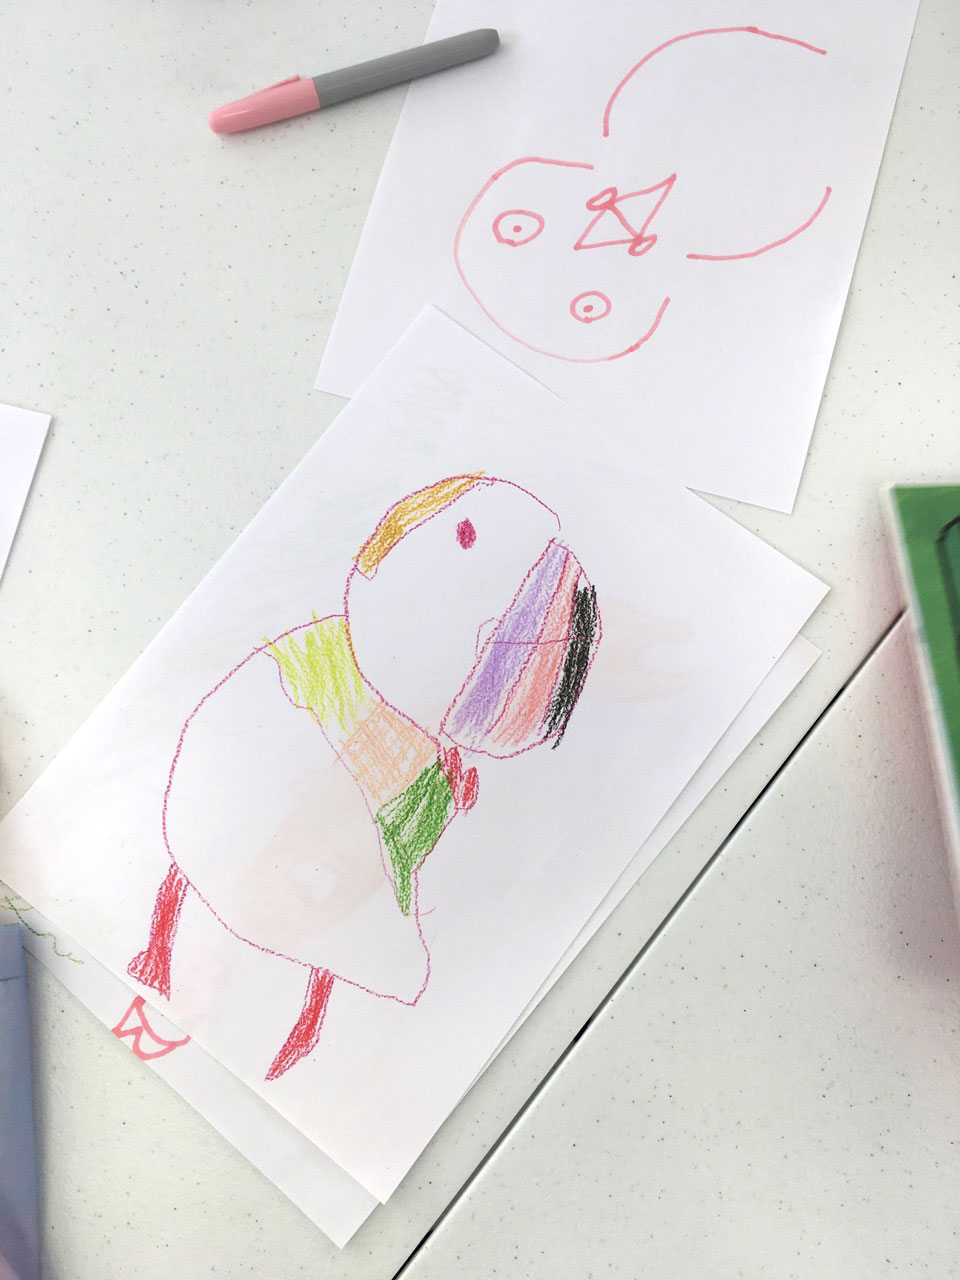 Child's drawing of a puffin